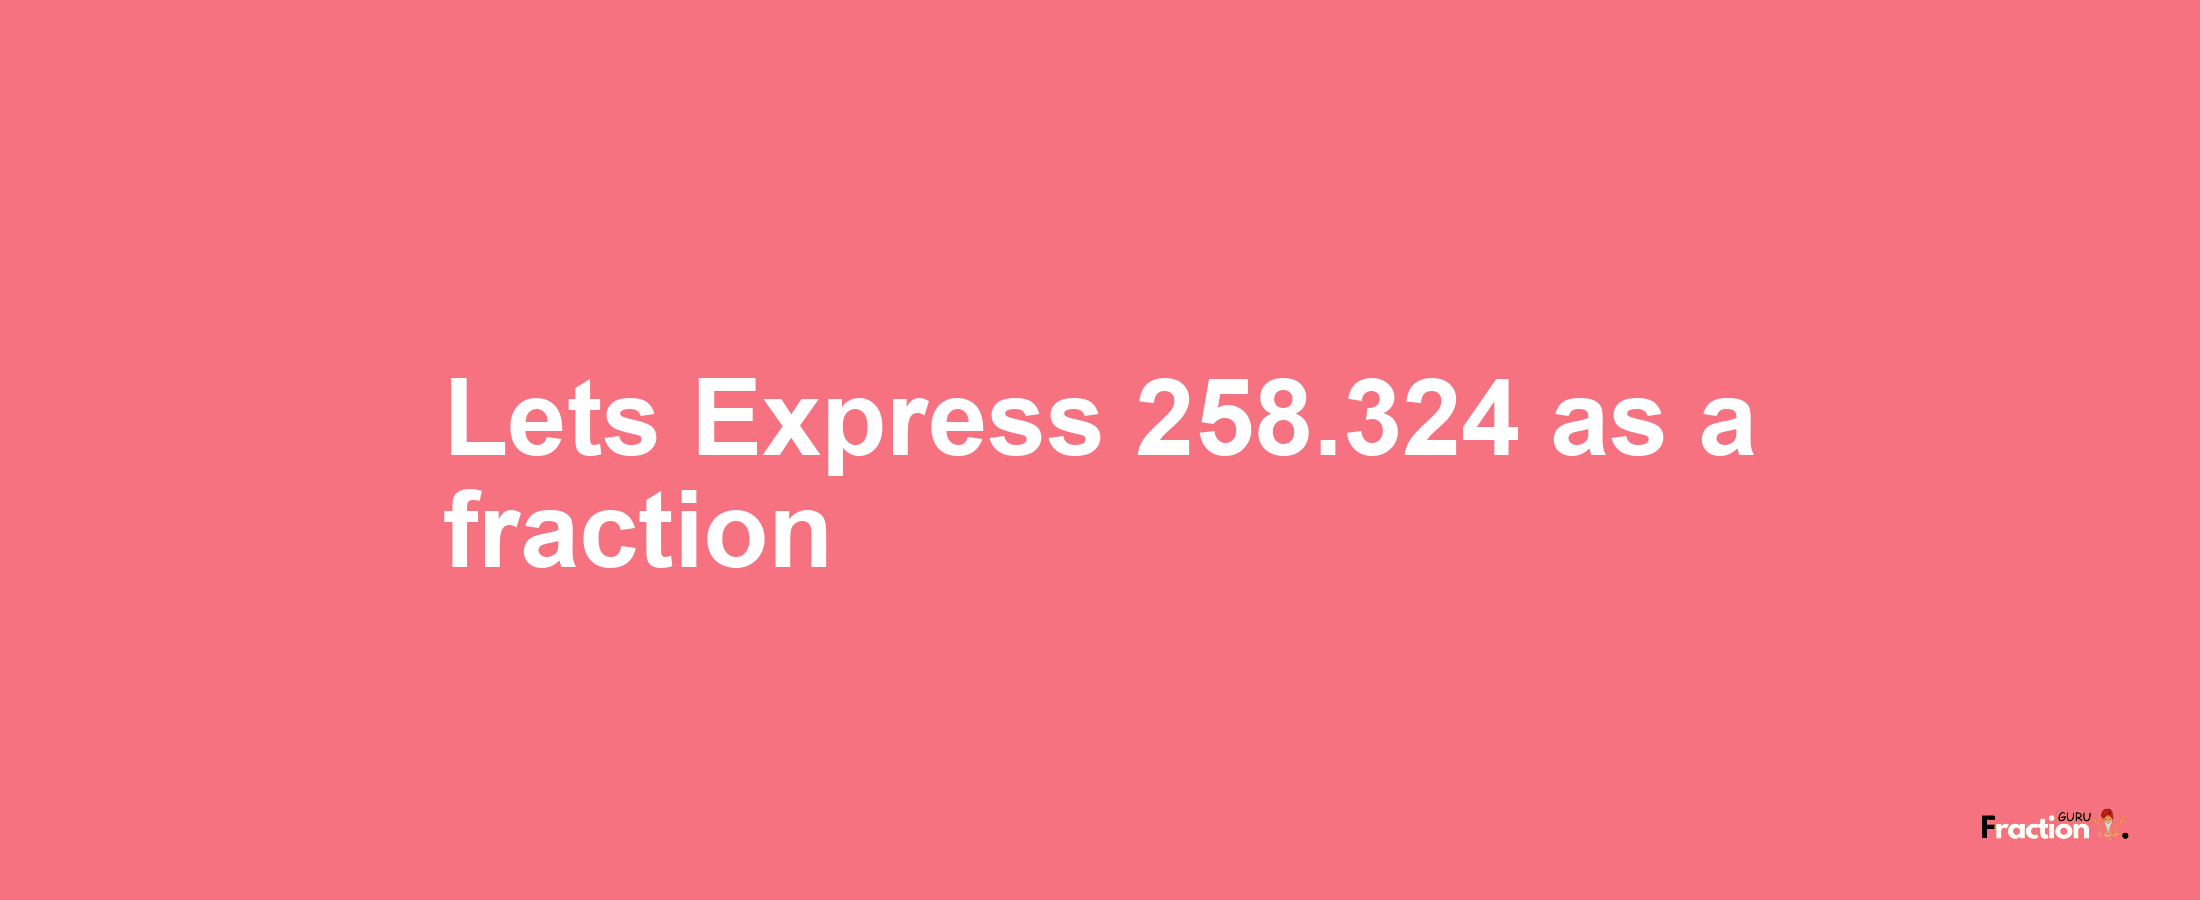 Lets Express 258.324 as afraction